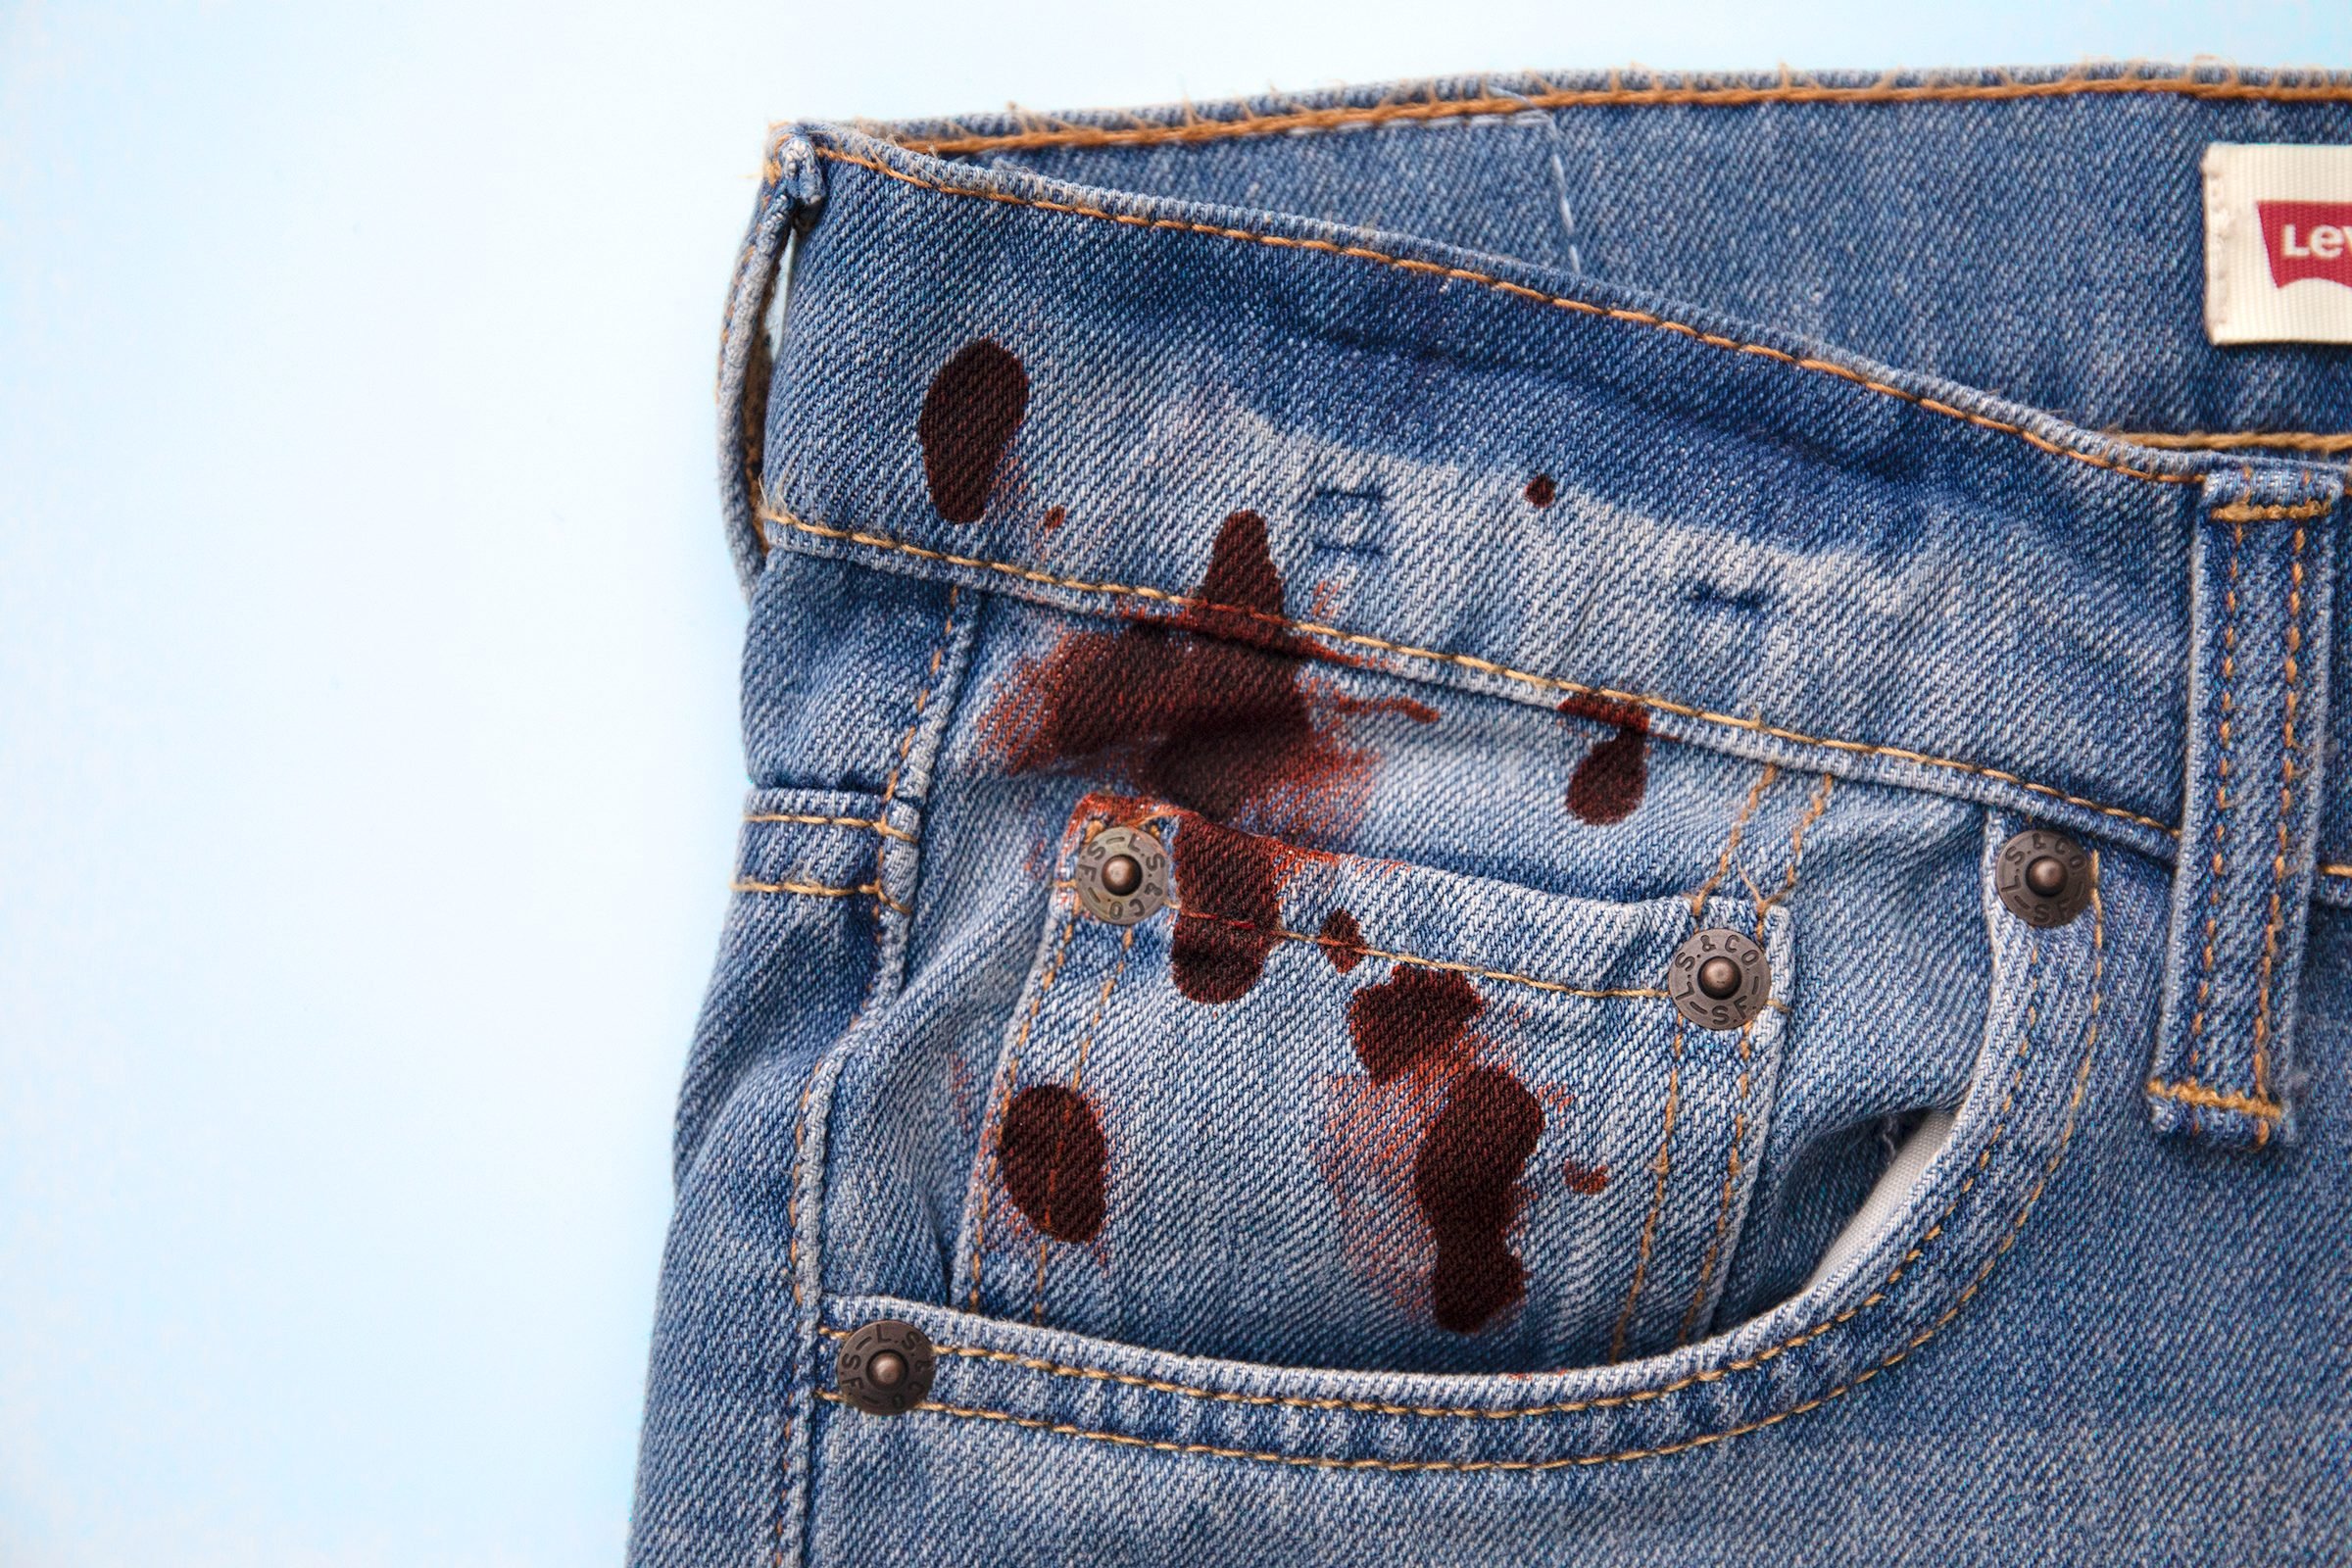 Remove blood stains - How to remove blood from clothing